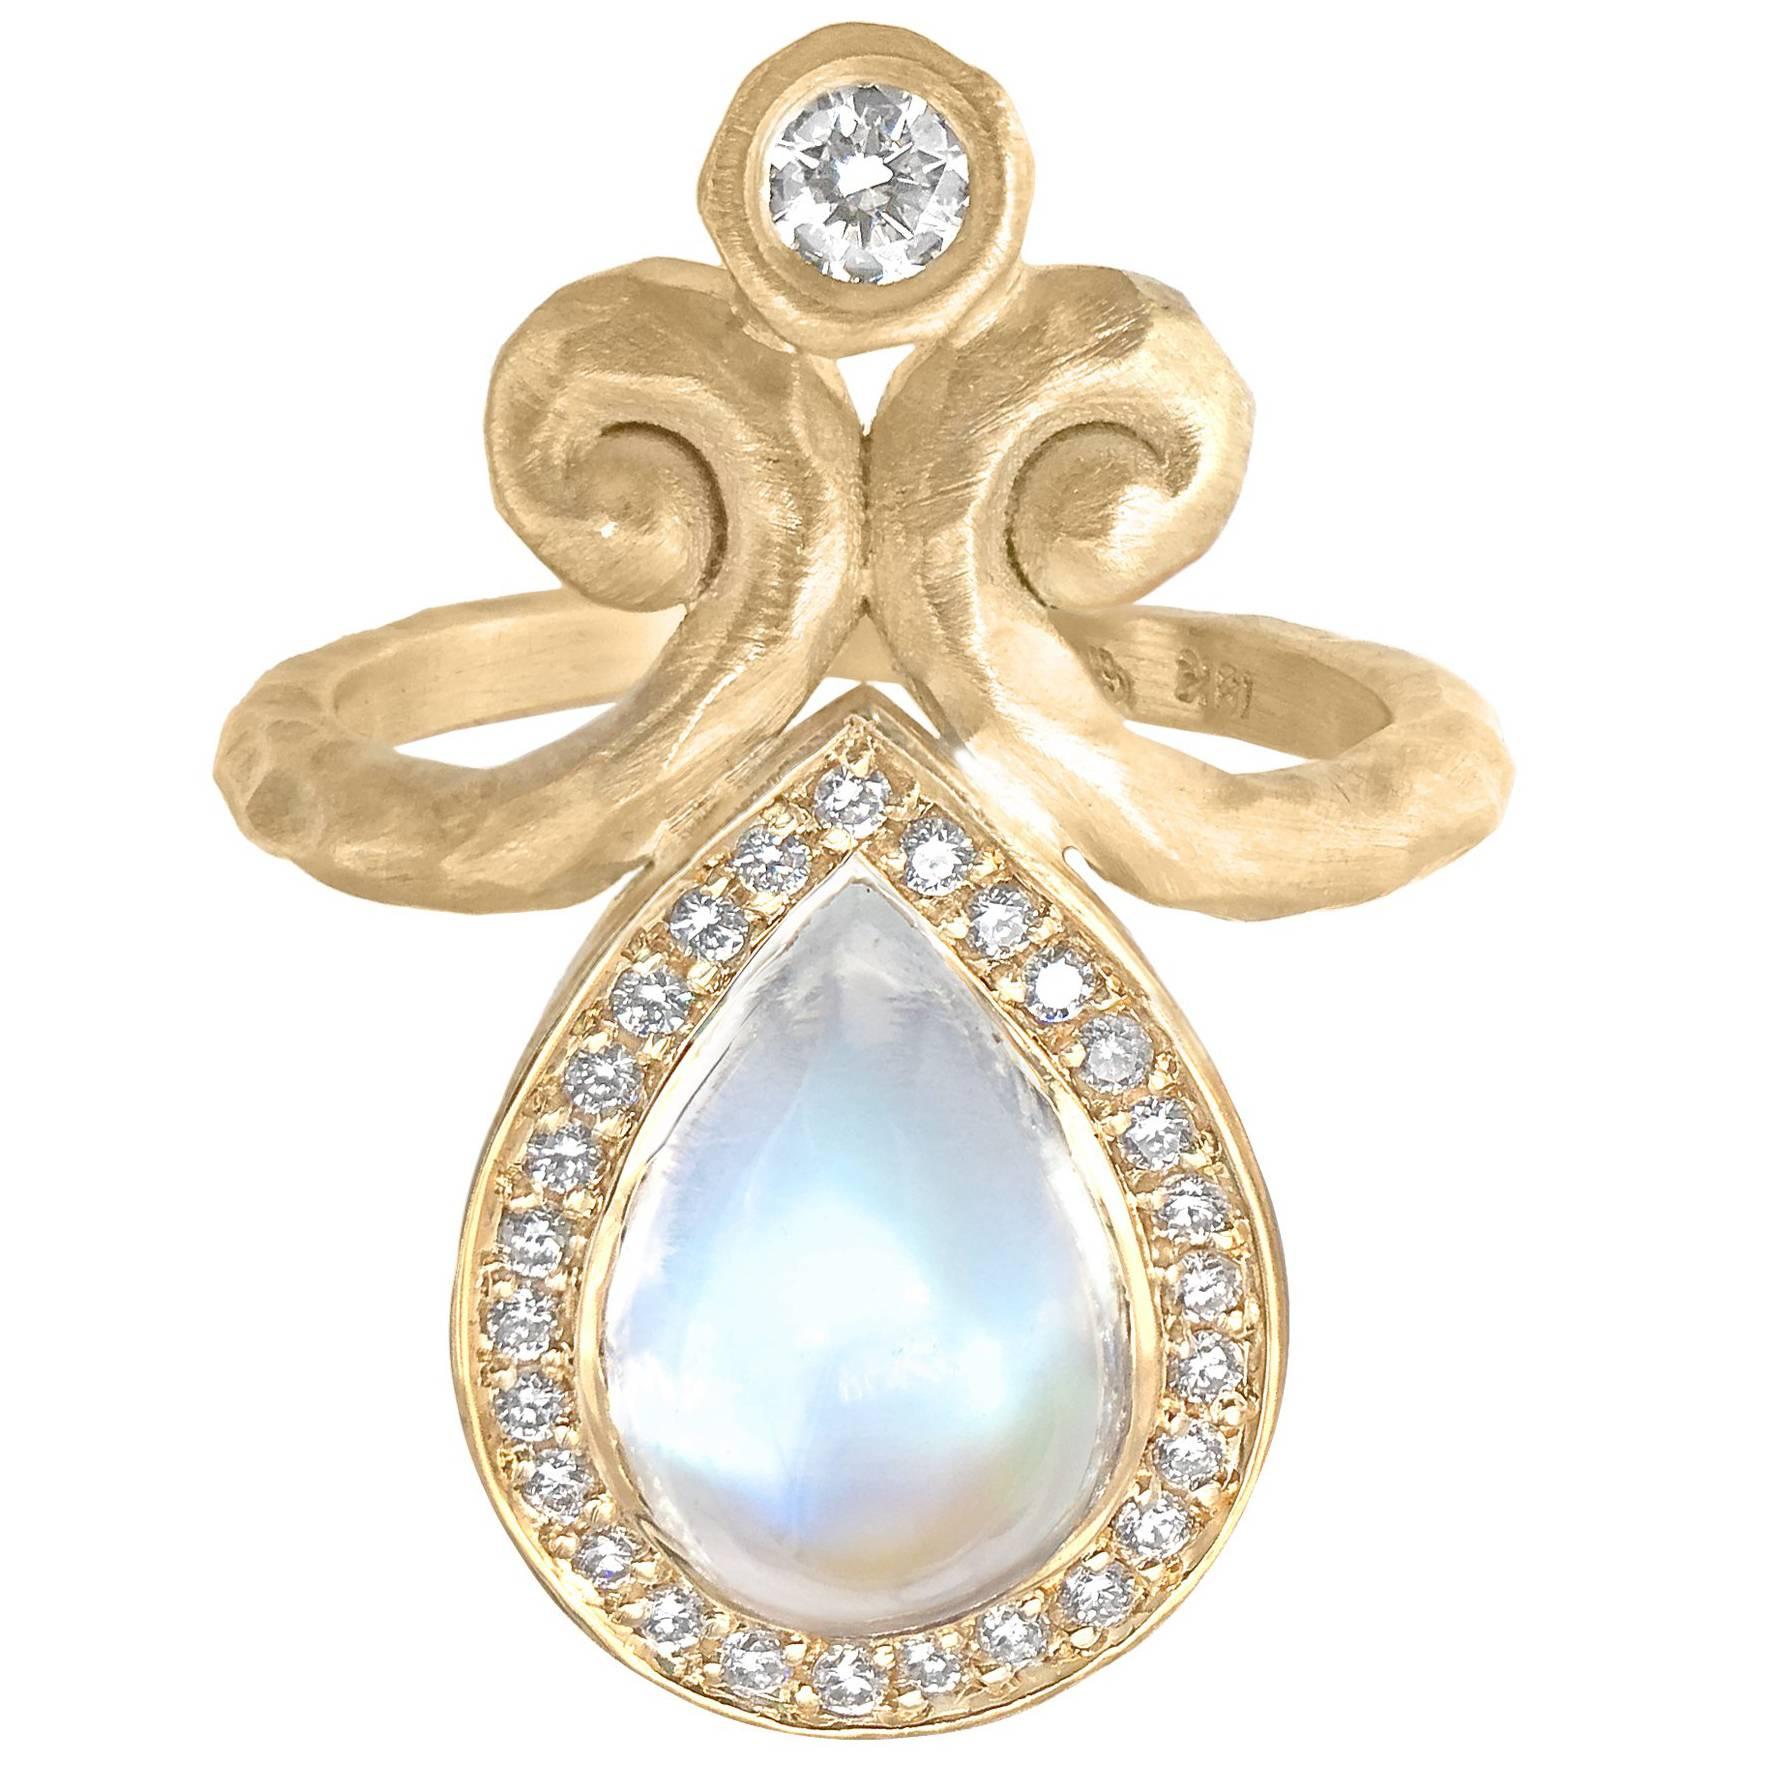 Pamela Froman One of a Kind Rainbow Moonstone White Diamond Hammered Gold Ring